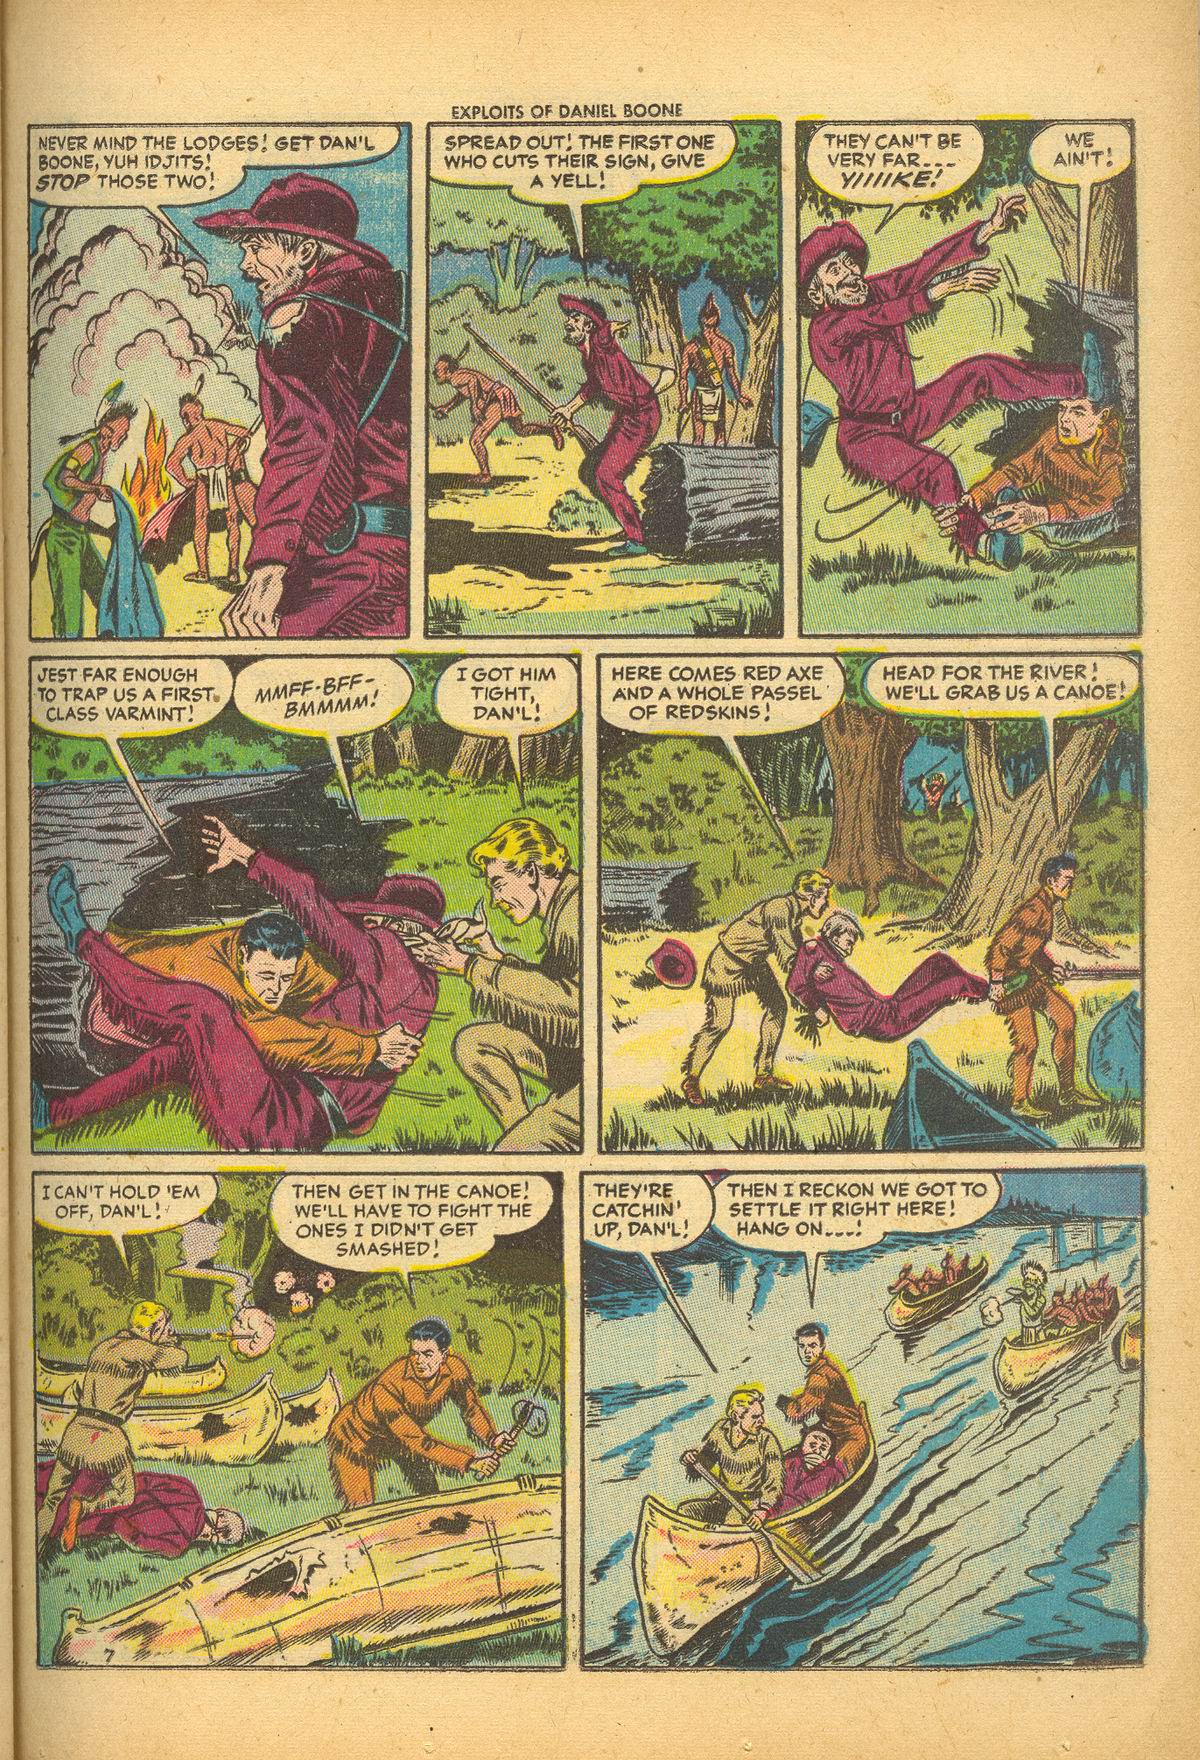 Read online Exploits of Daniel Boone comic -  Issue #2 - 25